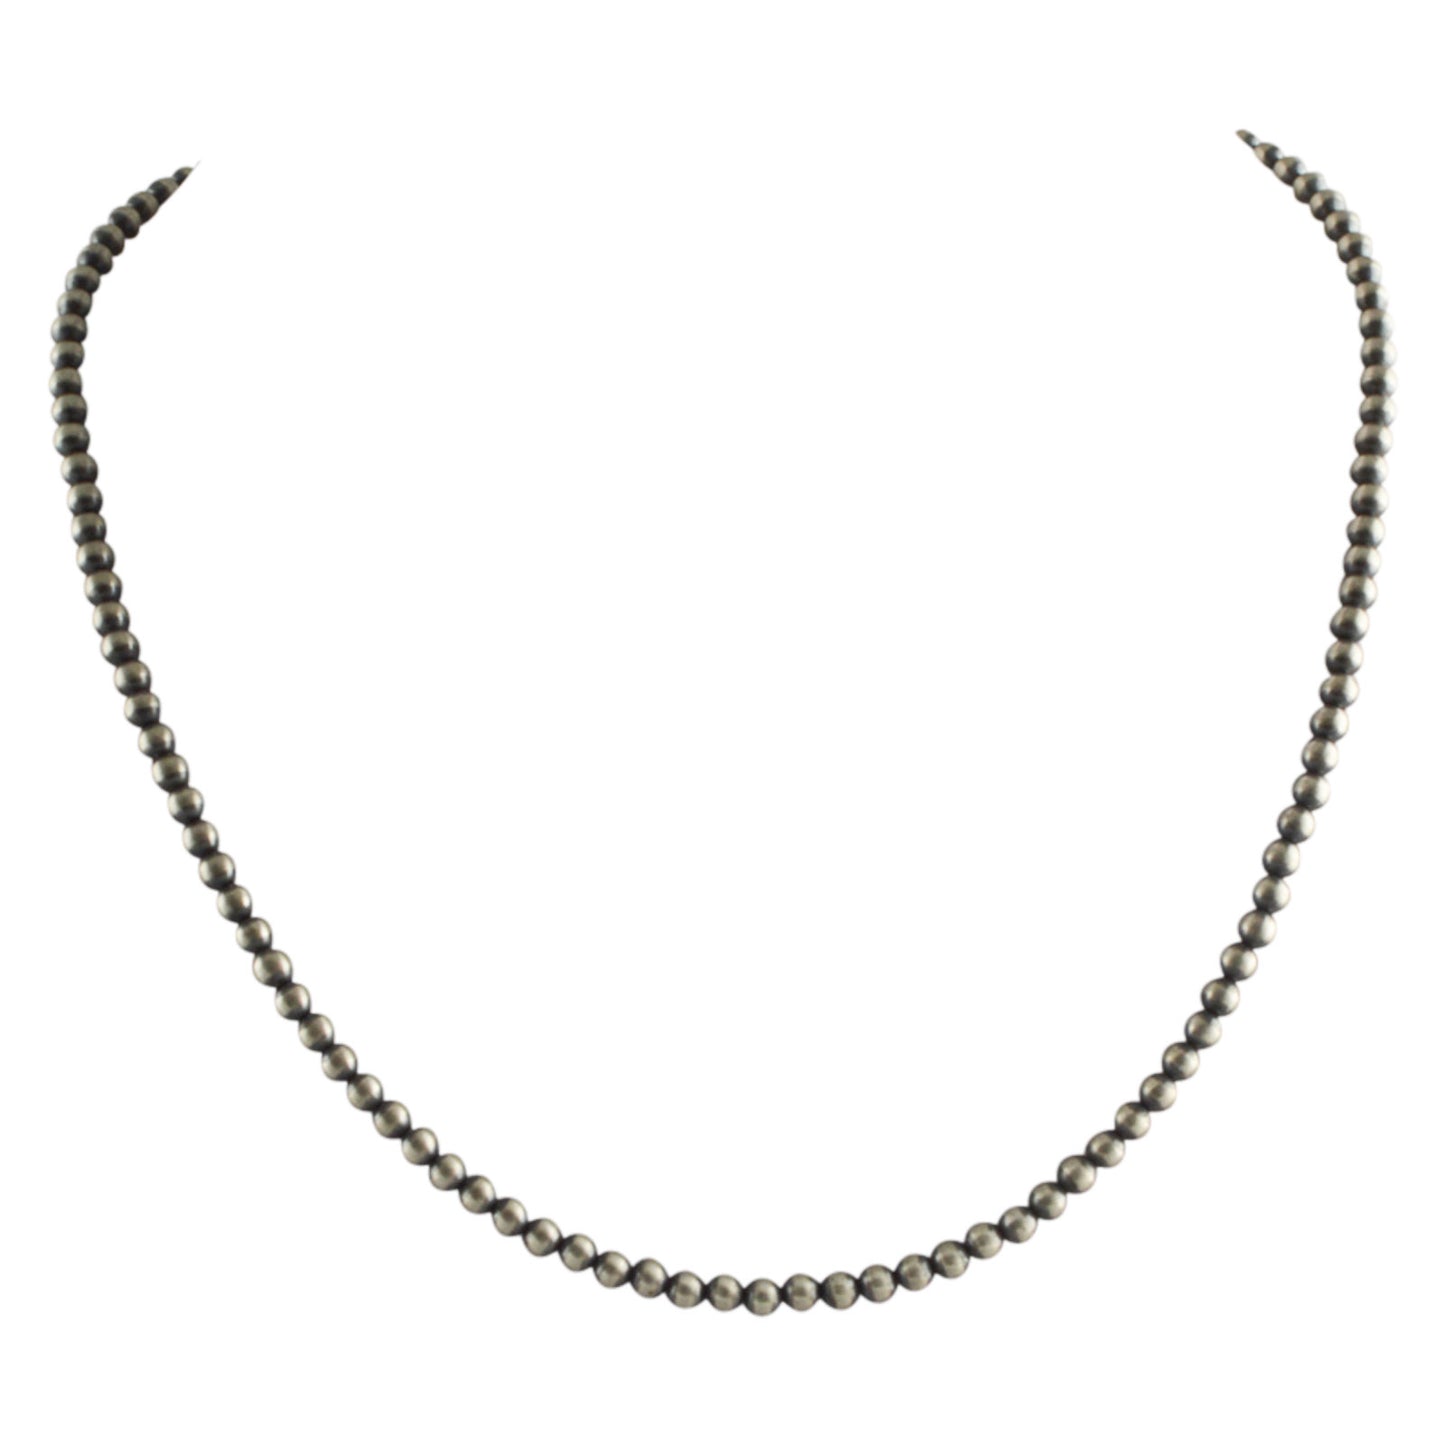 Sterling Silver Navajo Pearl 4mm Oxidize Round Bead Necklace. Available from 14" to 60"